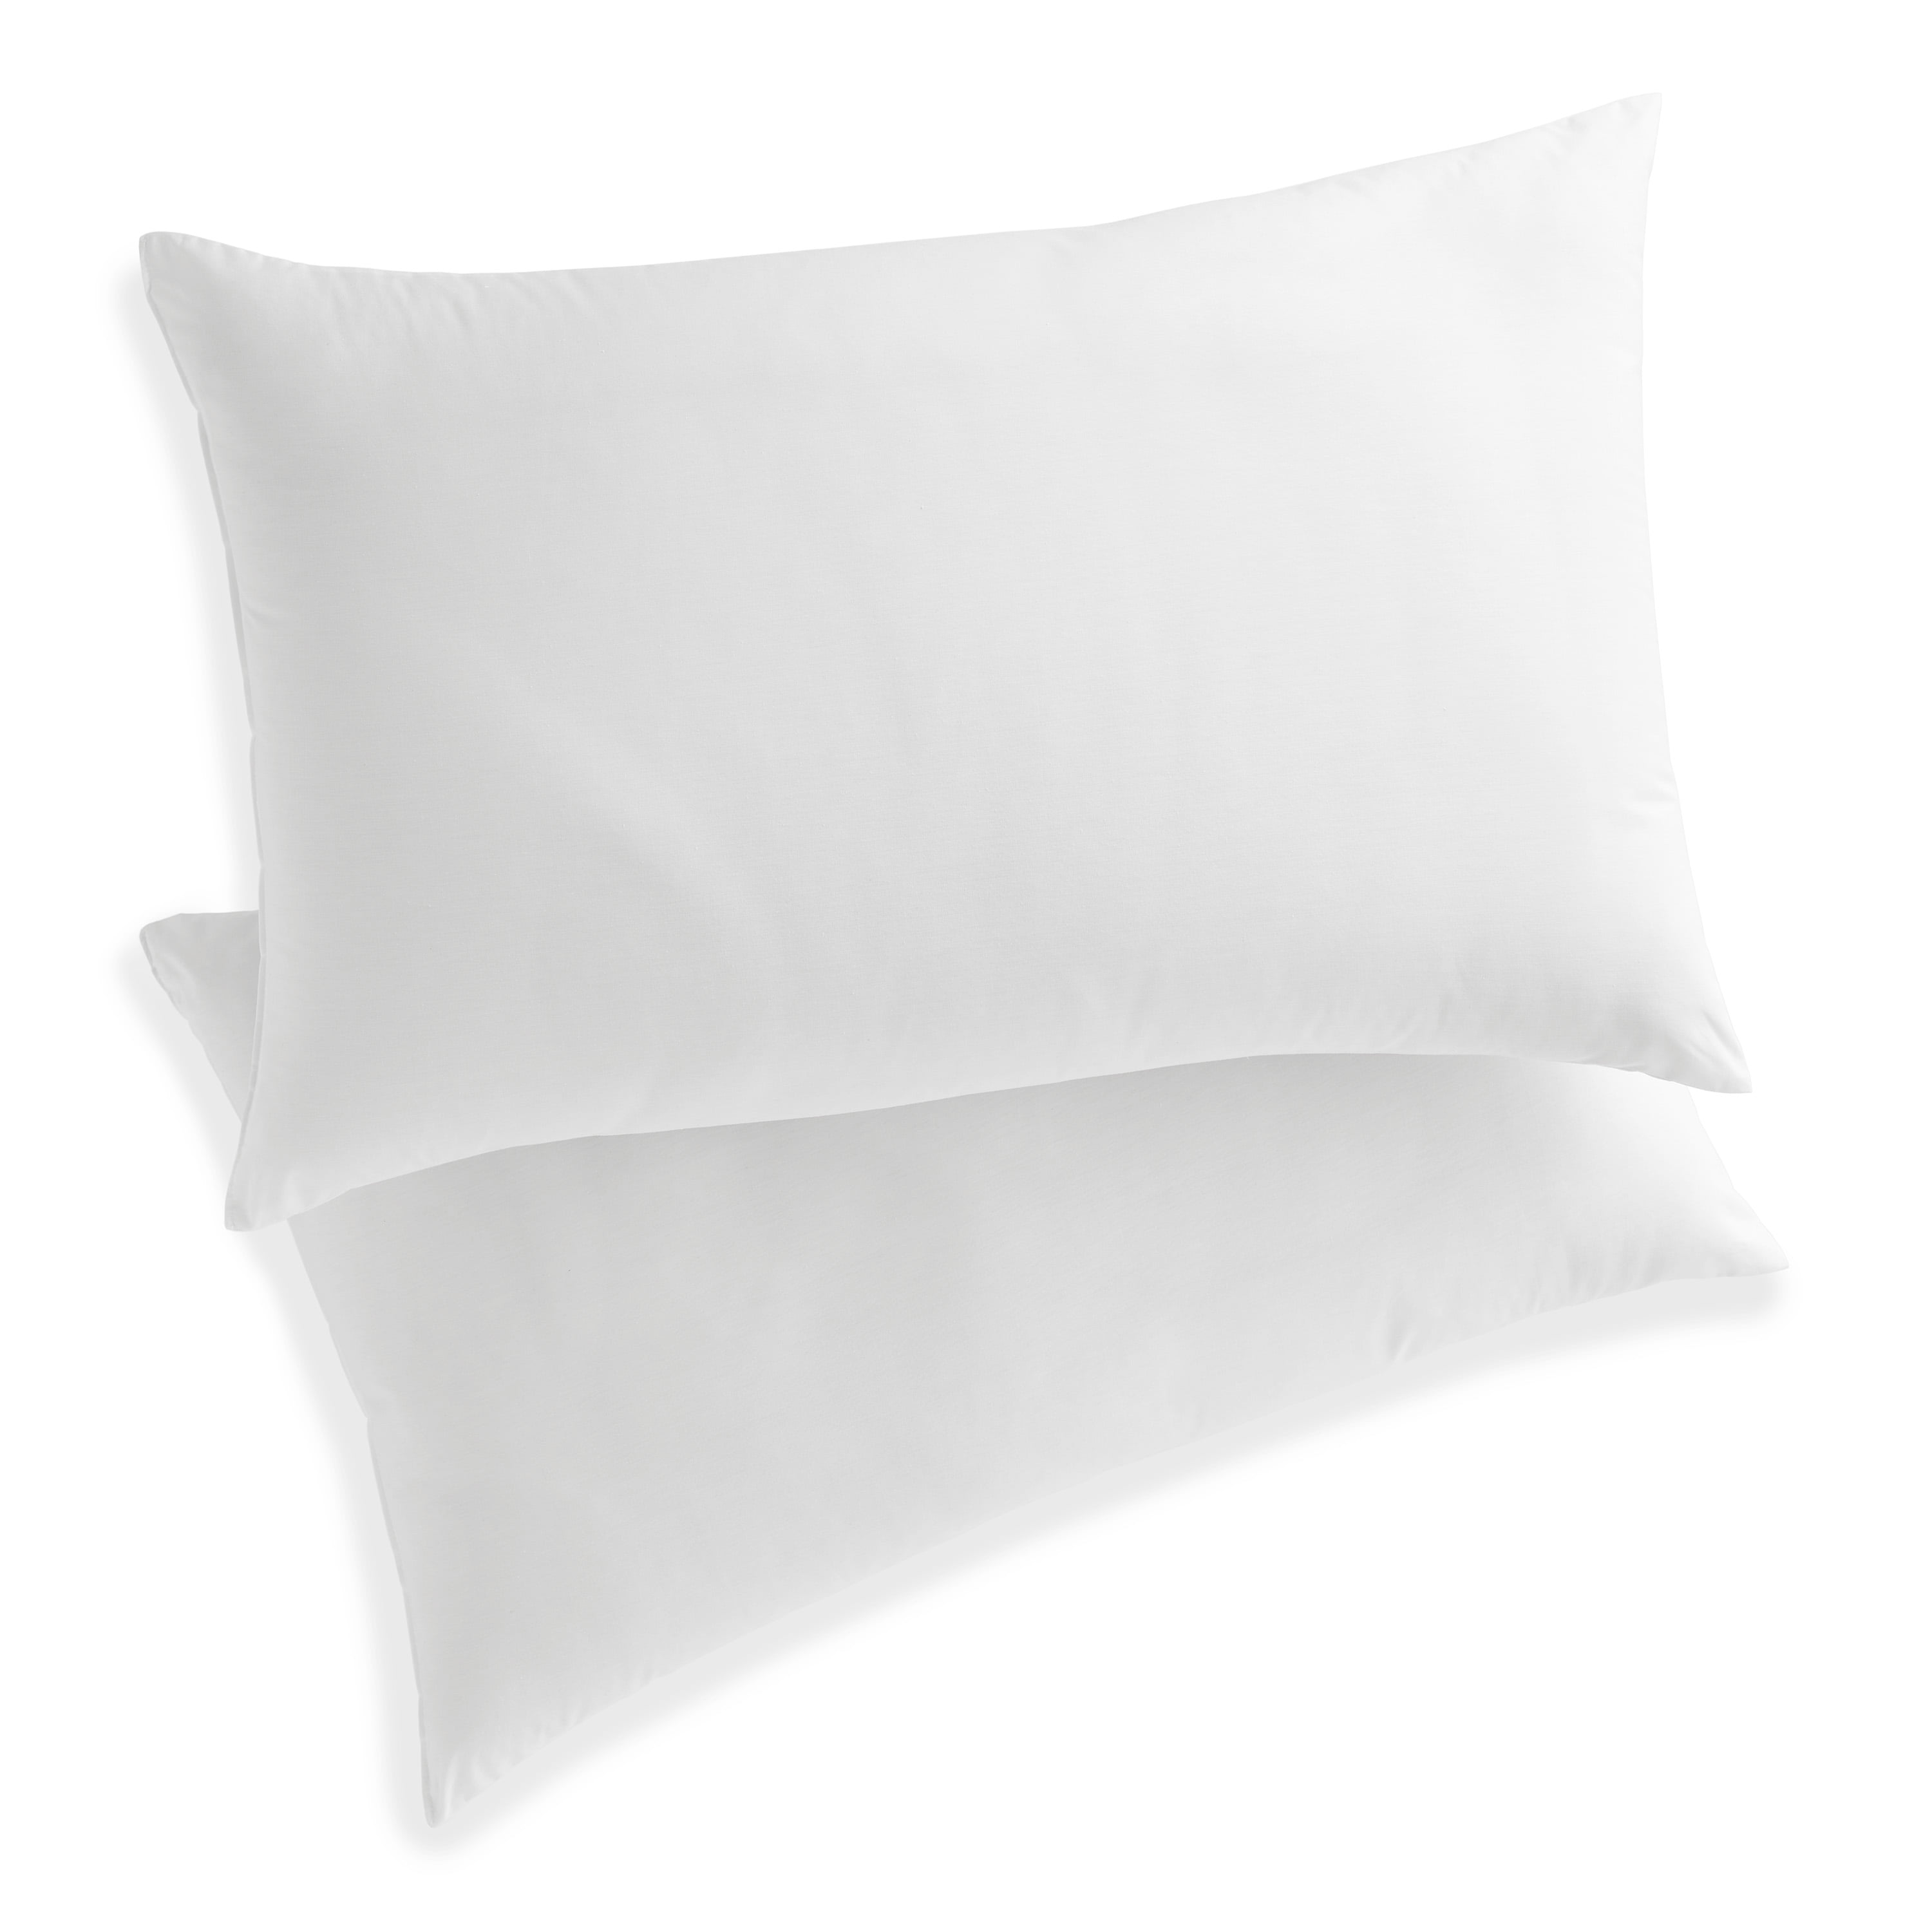 Isotonic Indulgence Standard Side Sleeper Pillow 26 X 20 for sale online 